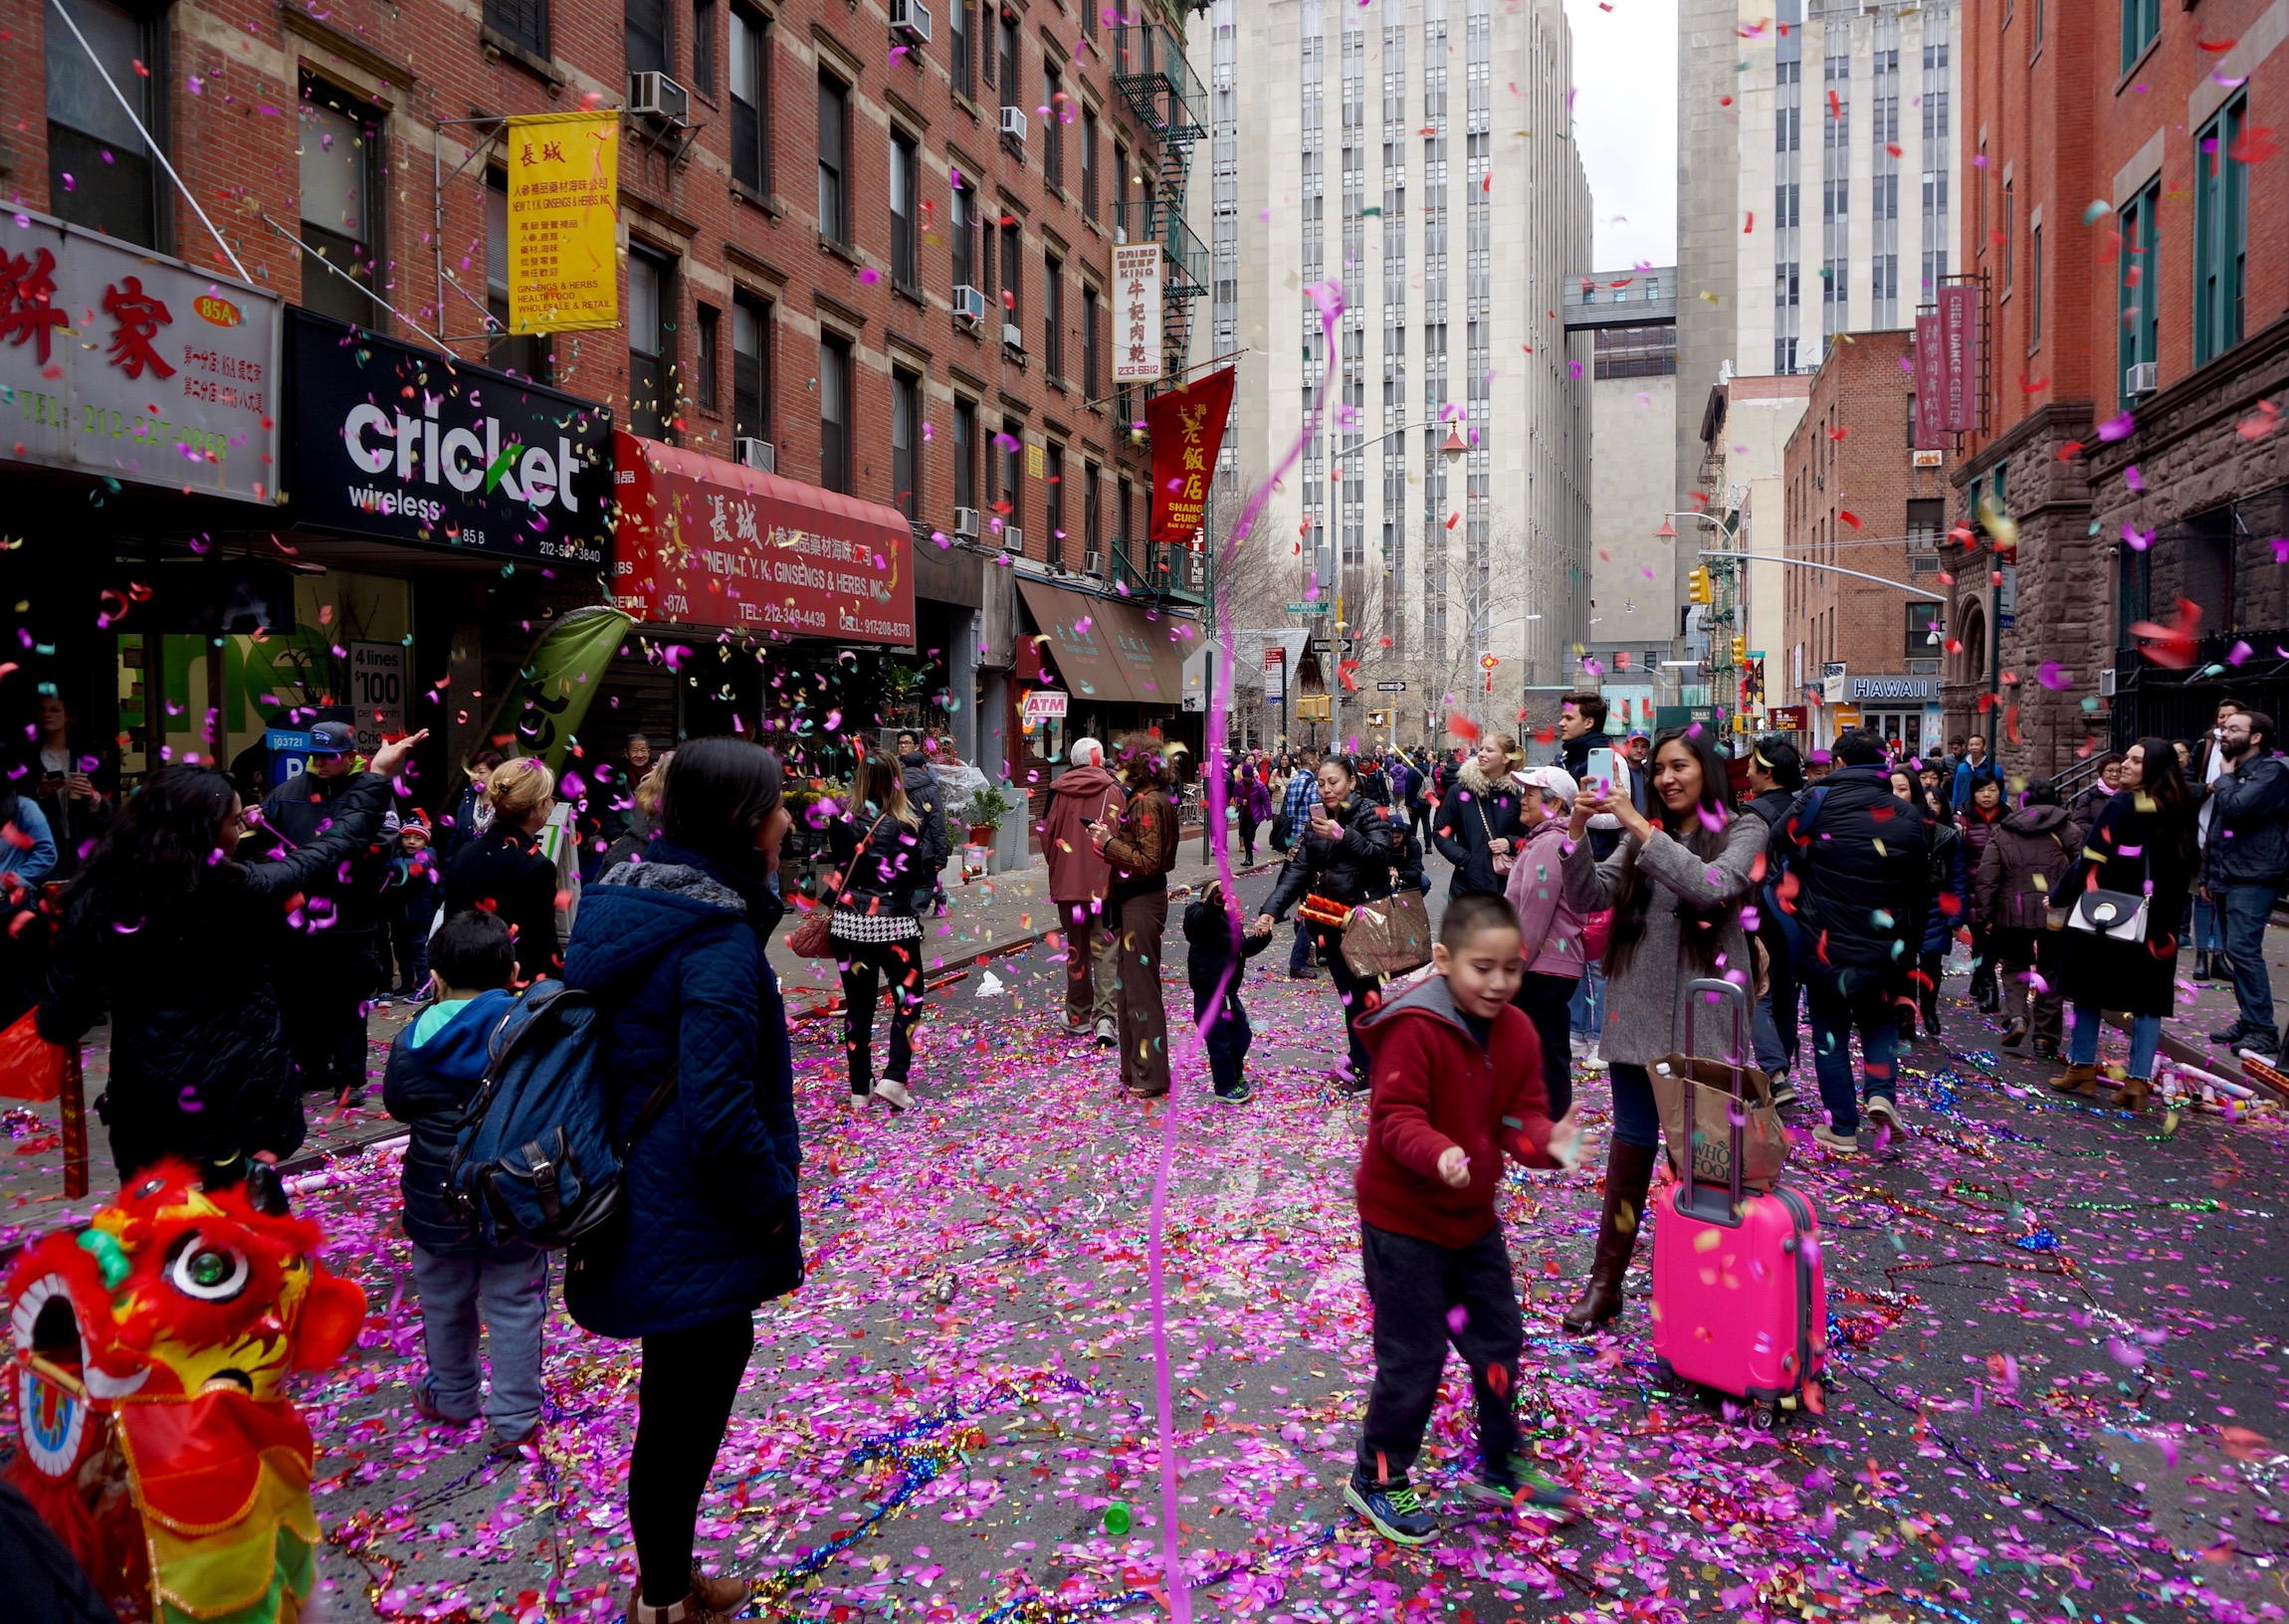 NY Cliché of the Day: Lunar New Year Celebrations in Chinatown NYC - New York Cliché2300 x 1632